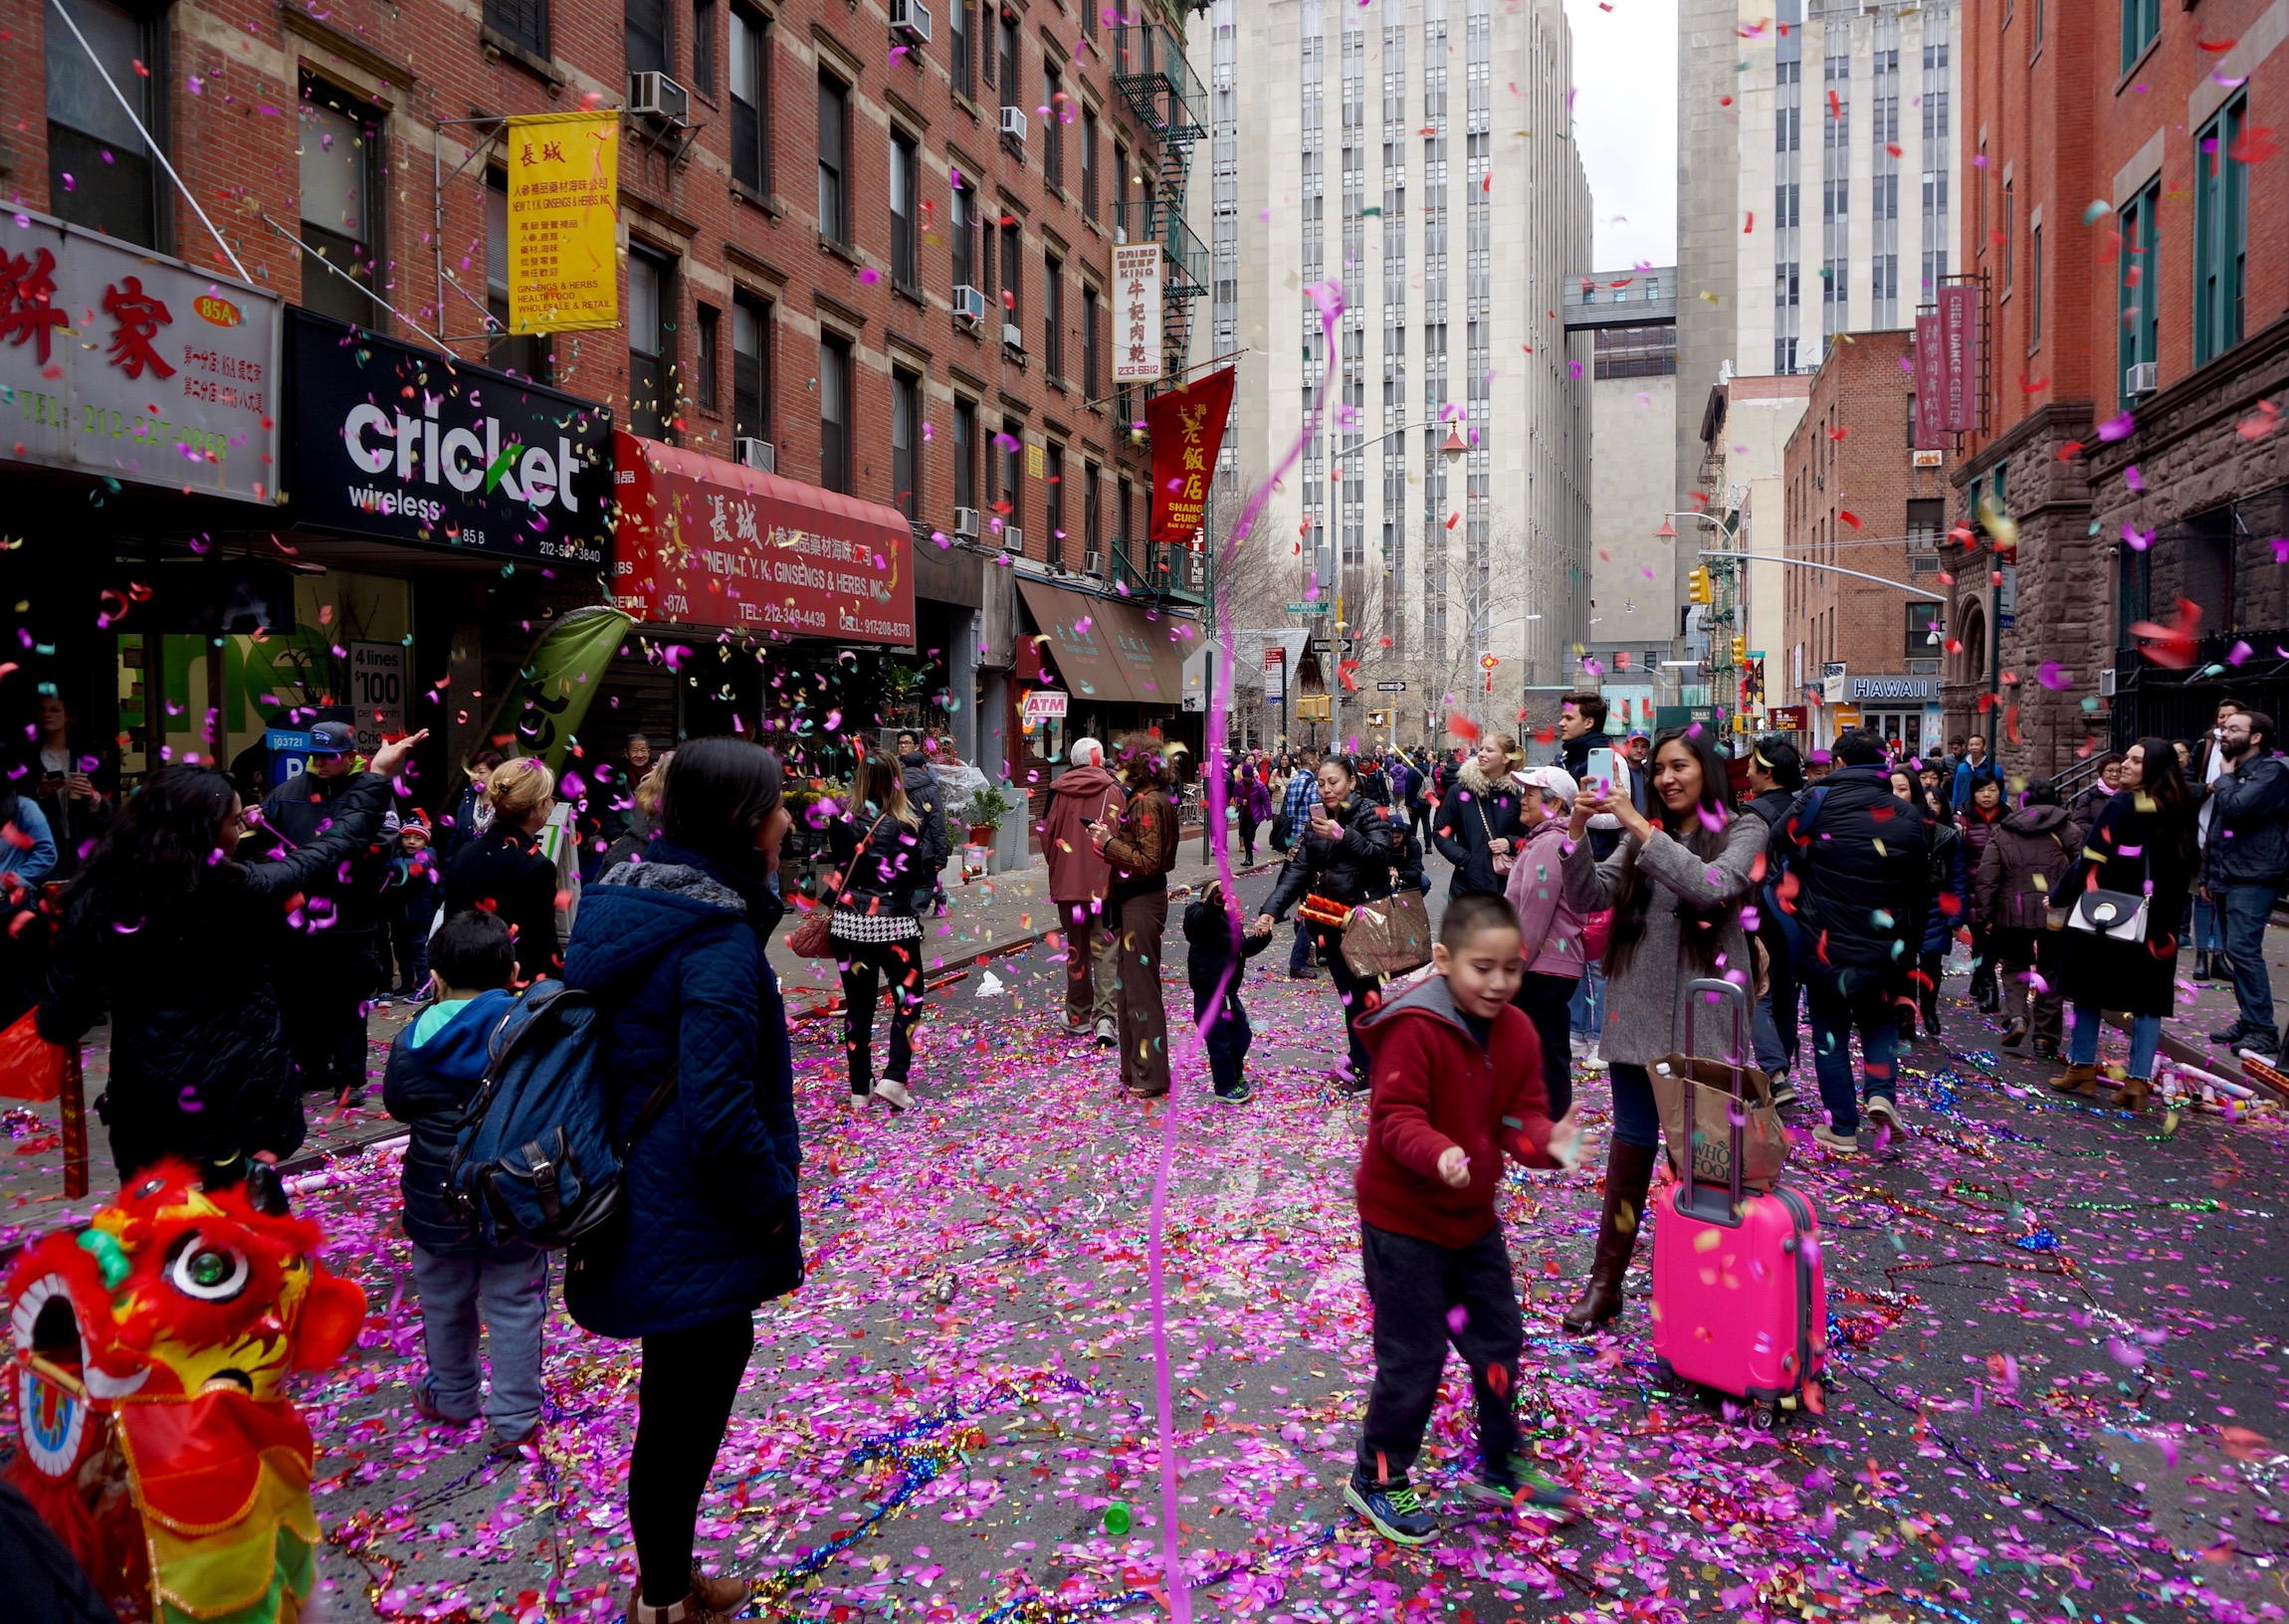 NY Cliché of the Day: Lunar New Year Celebrations in Chinatown NYC - New York Cliché2300 x 1632